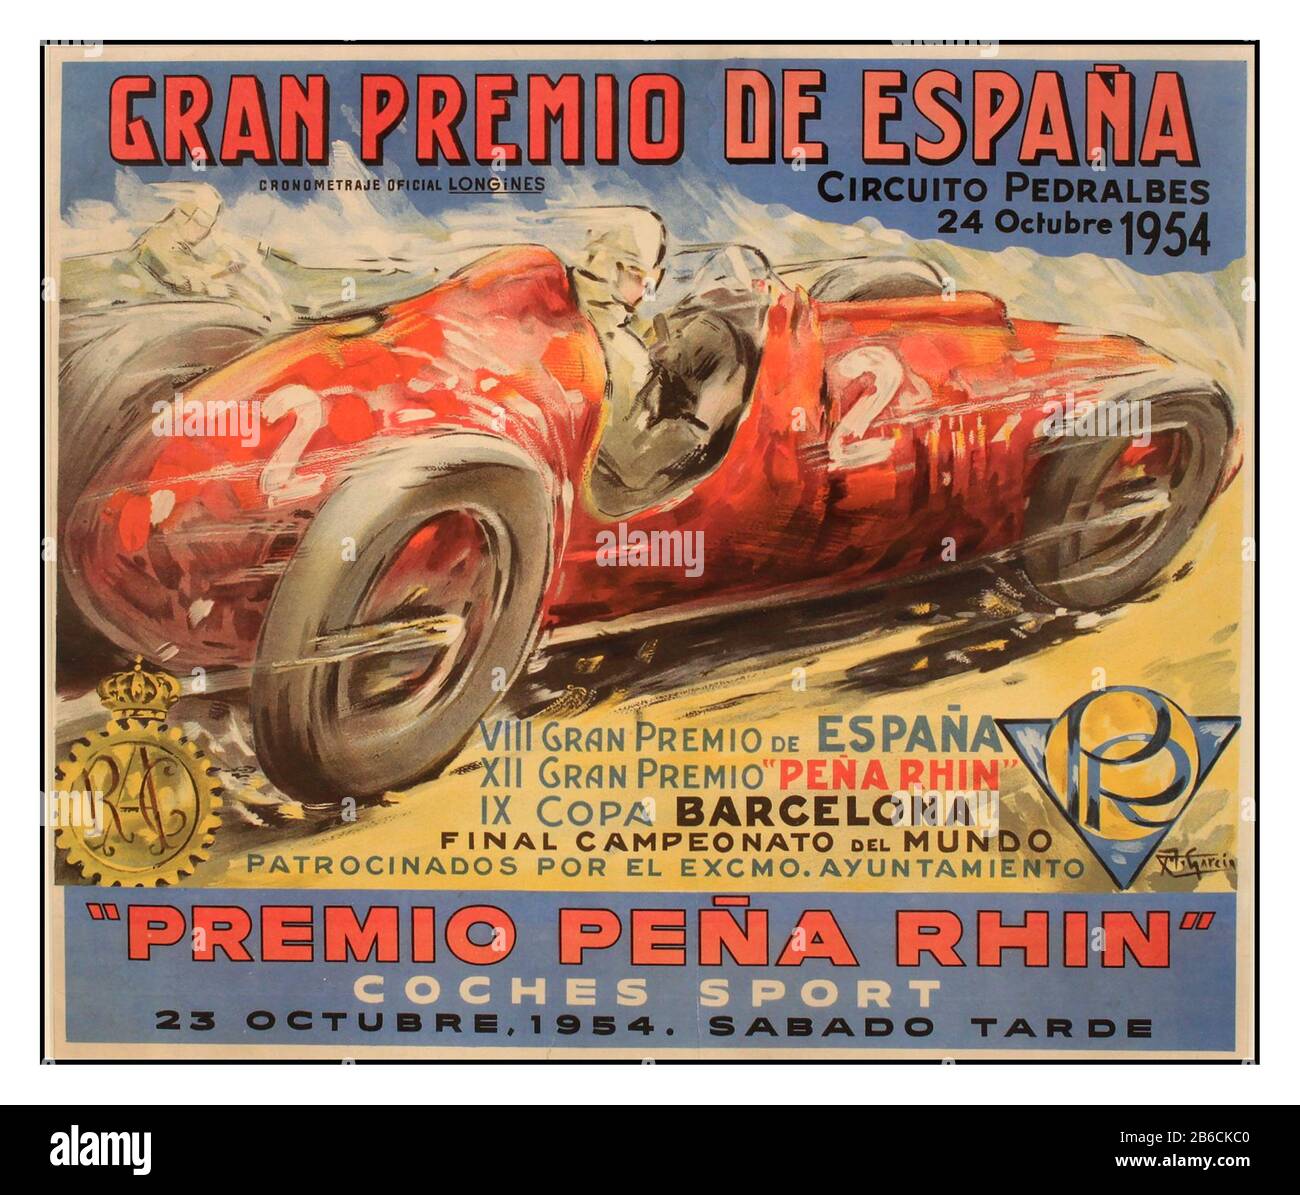 Vintage 1954 Motor Racing Poster Spanish Grand Prix 1954 – Gran Premio de España 1954 – Peña Rhin The Pena Rhin Grand Prix was a Grand Prix motor racing event staged at three different circuits in three different eras in Spain. The race was held intermittently over its history, sometimes for full-size Grand Prix cars, sometimes for sports cars.  In the 1950s it was held at the Pedralbes Circuit. This Gran Premio de Espana Circuito Pedralbes poster was created by M Garcia for the Premio Pena Rhin that took place on 24 October 1954. Stock Photo